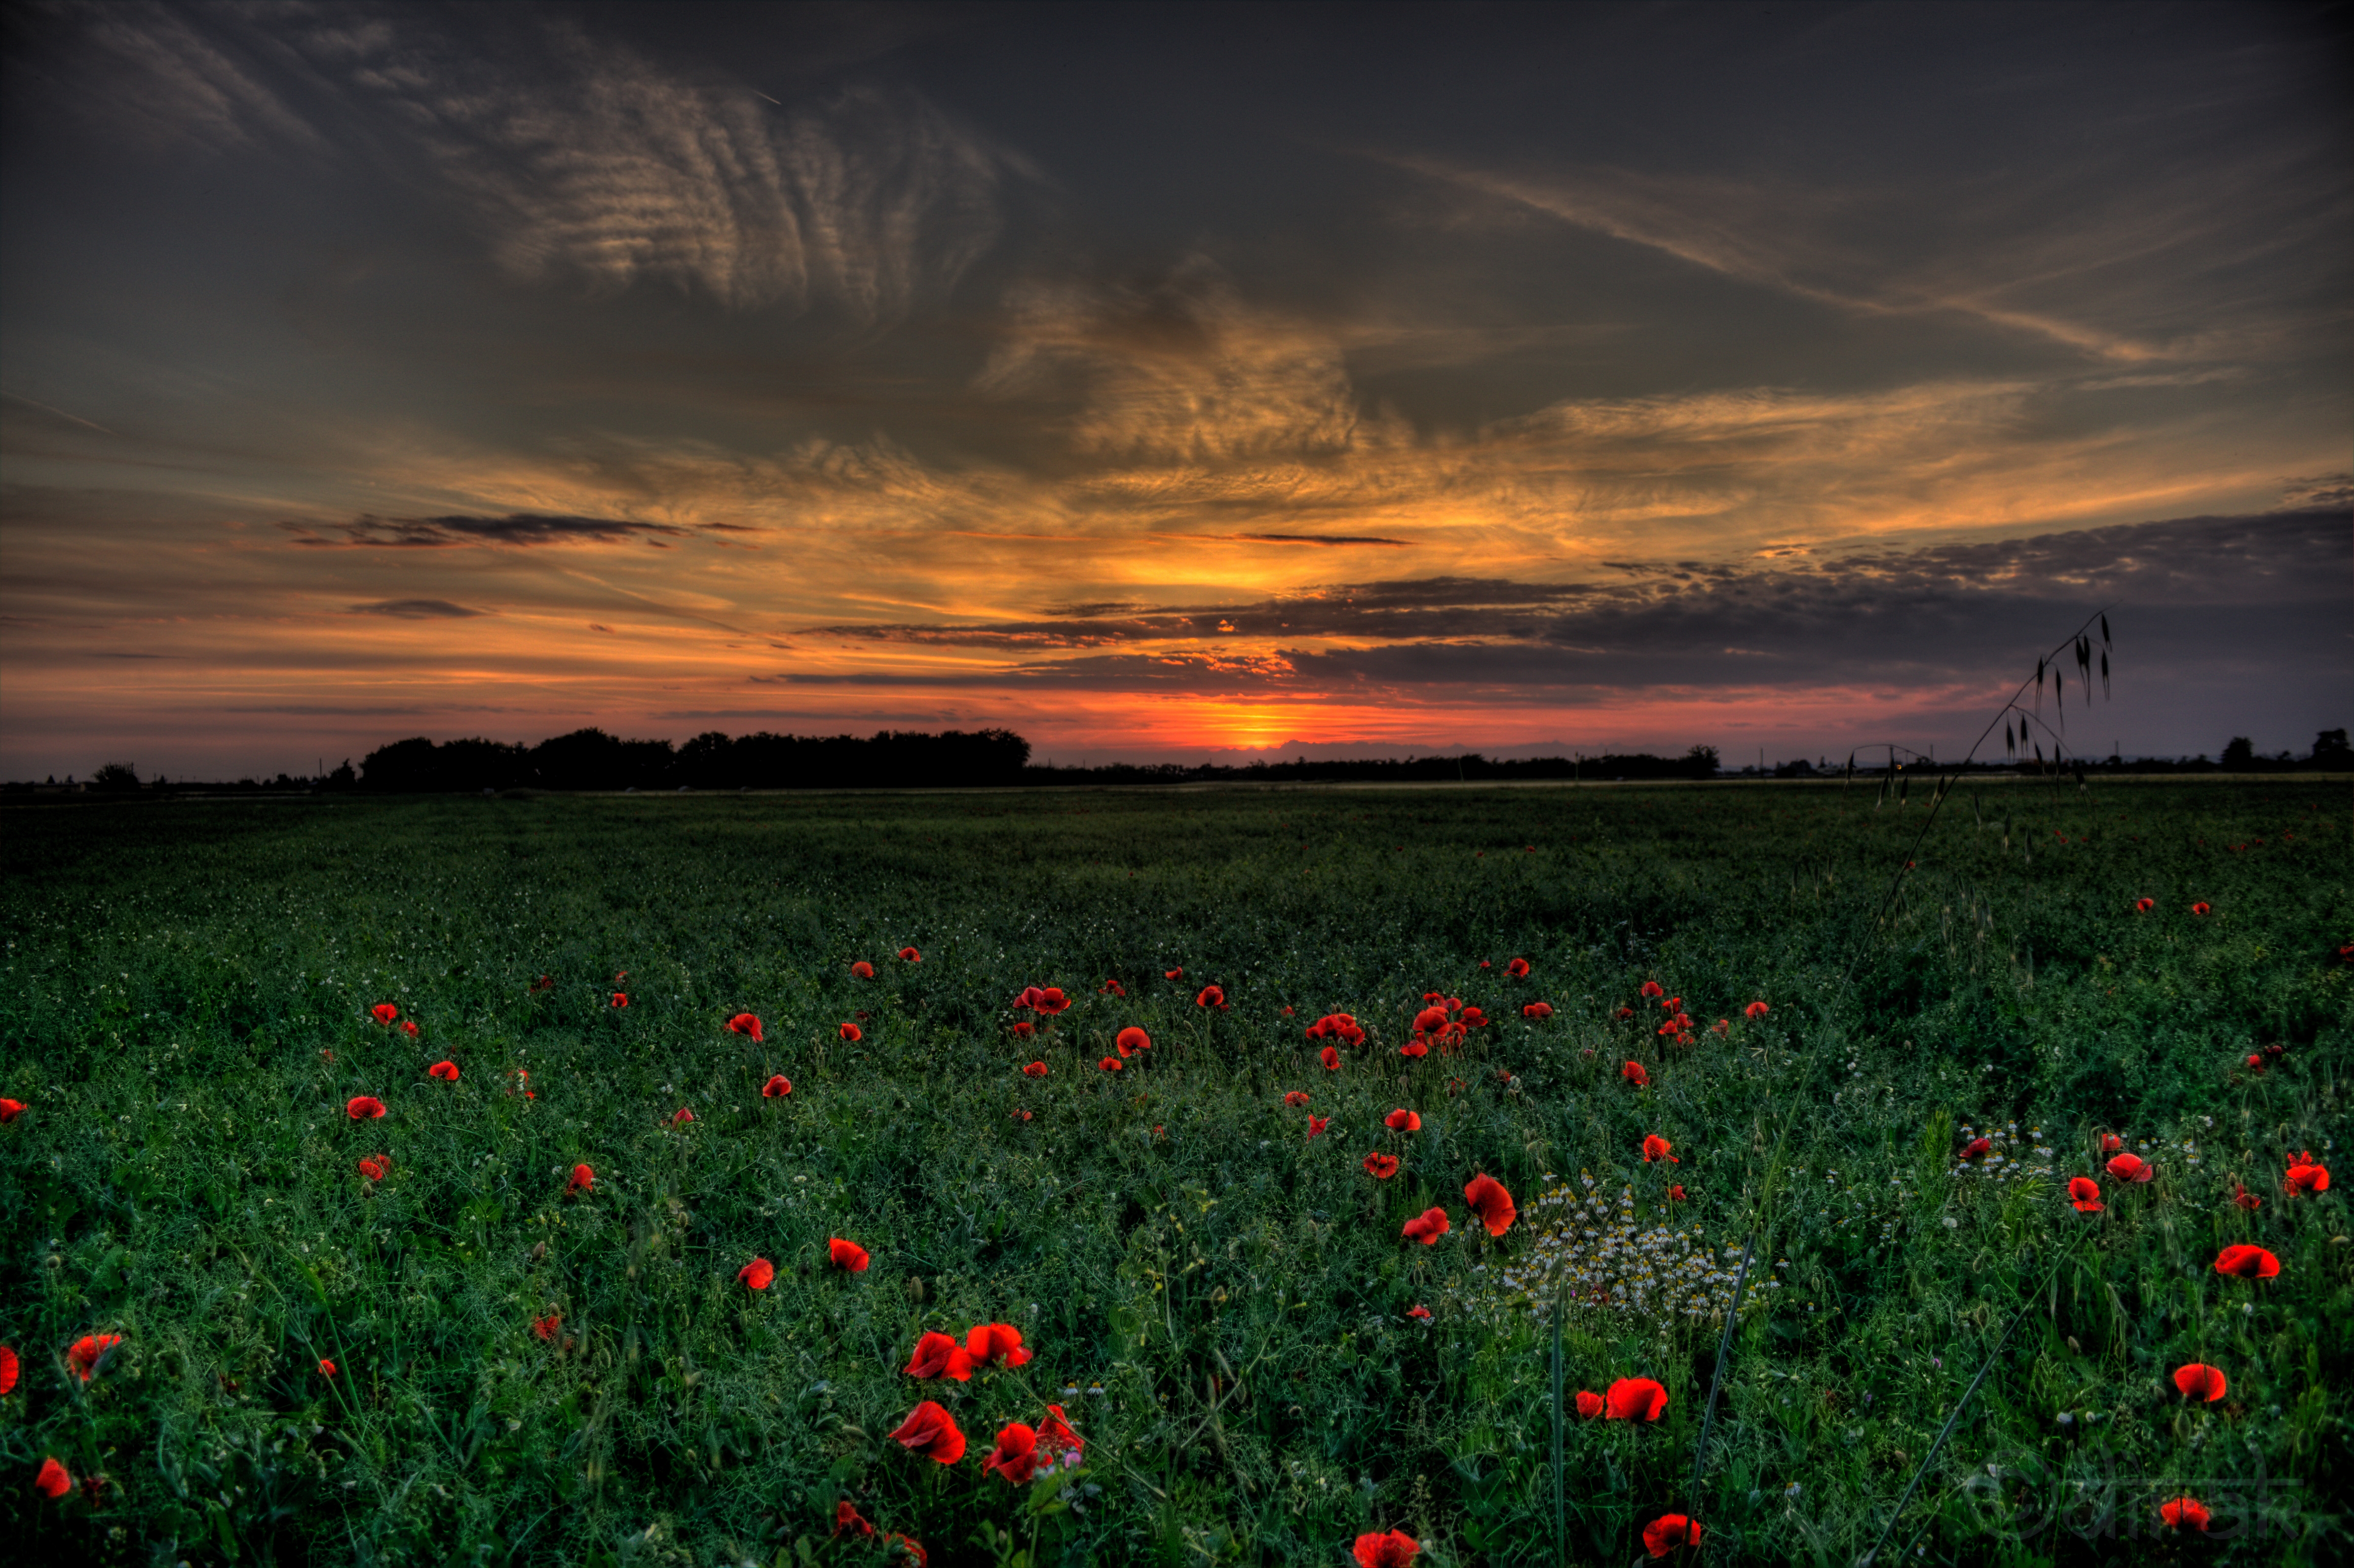 Sunset on a field of red flowers